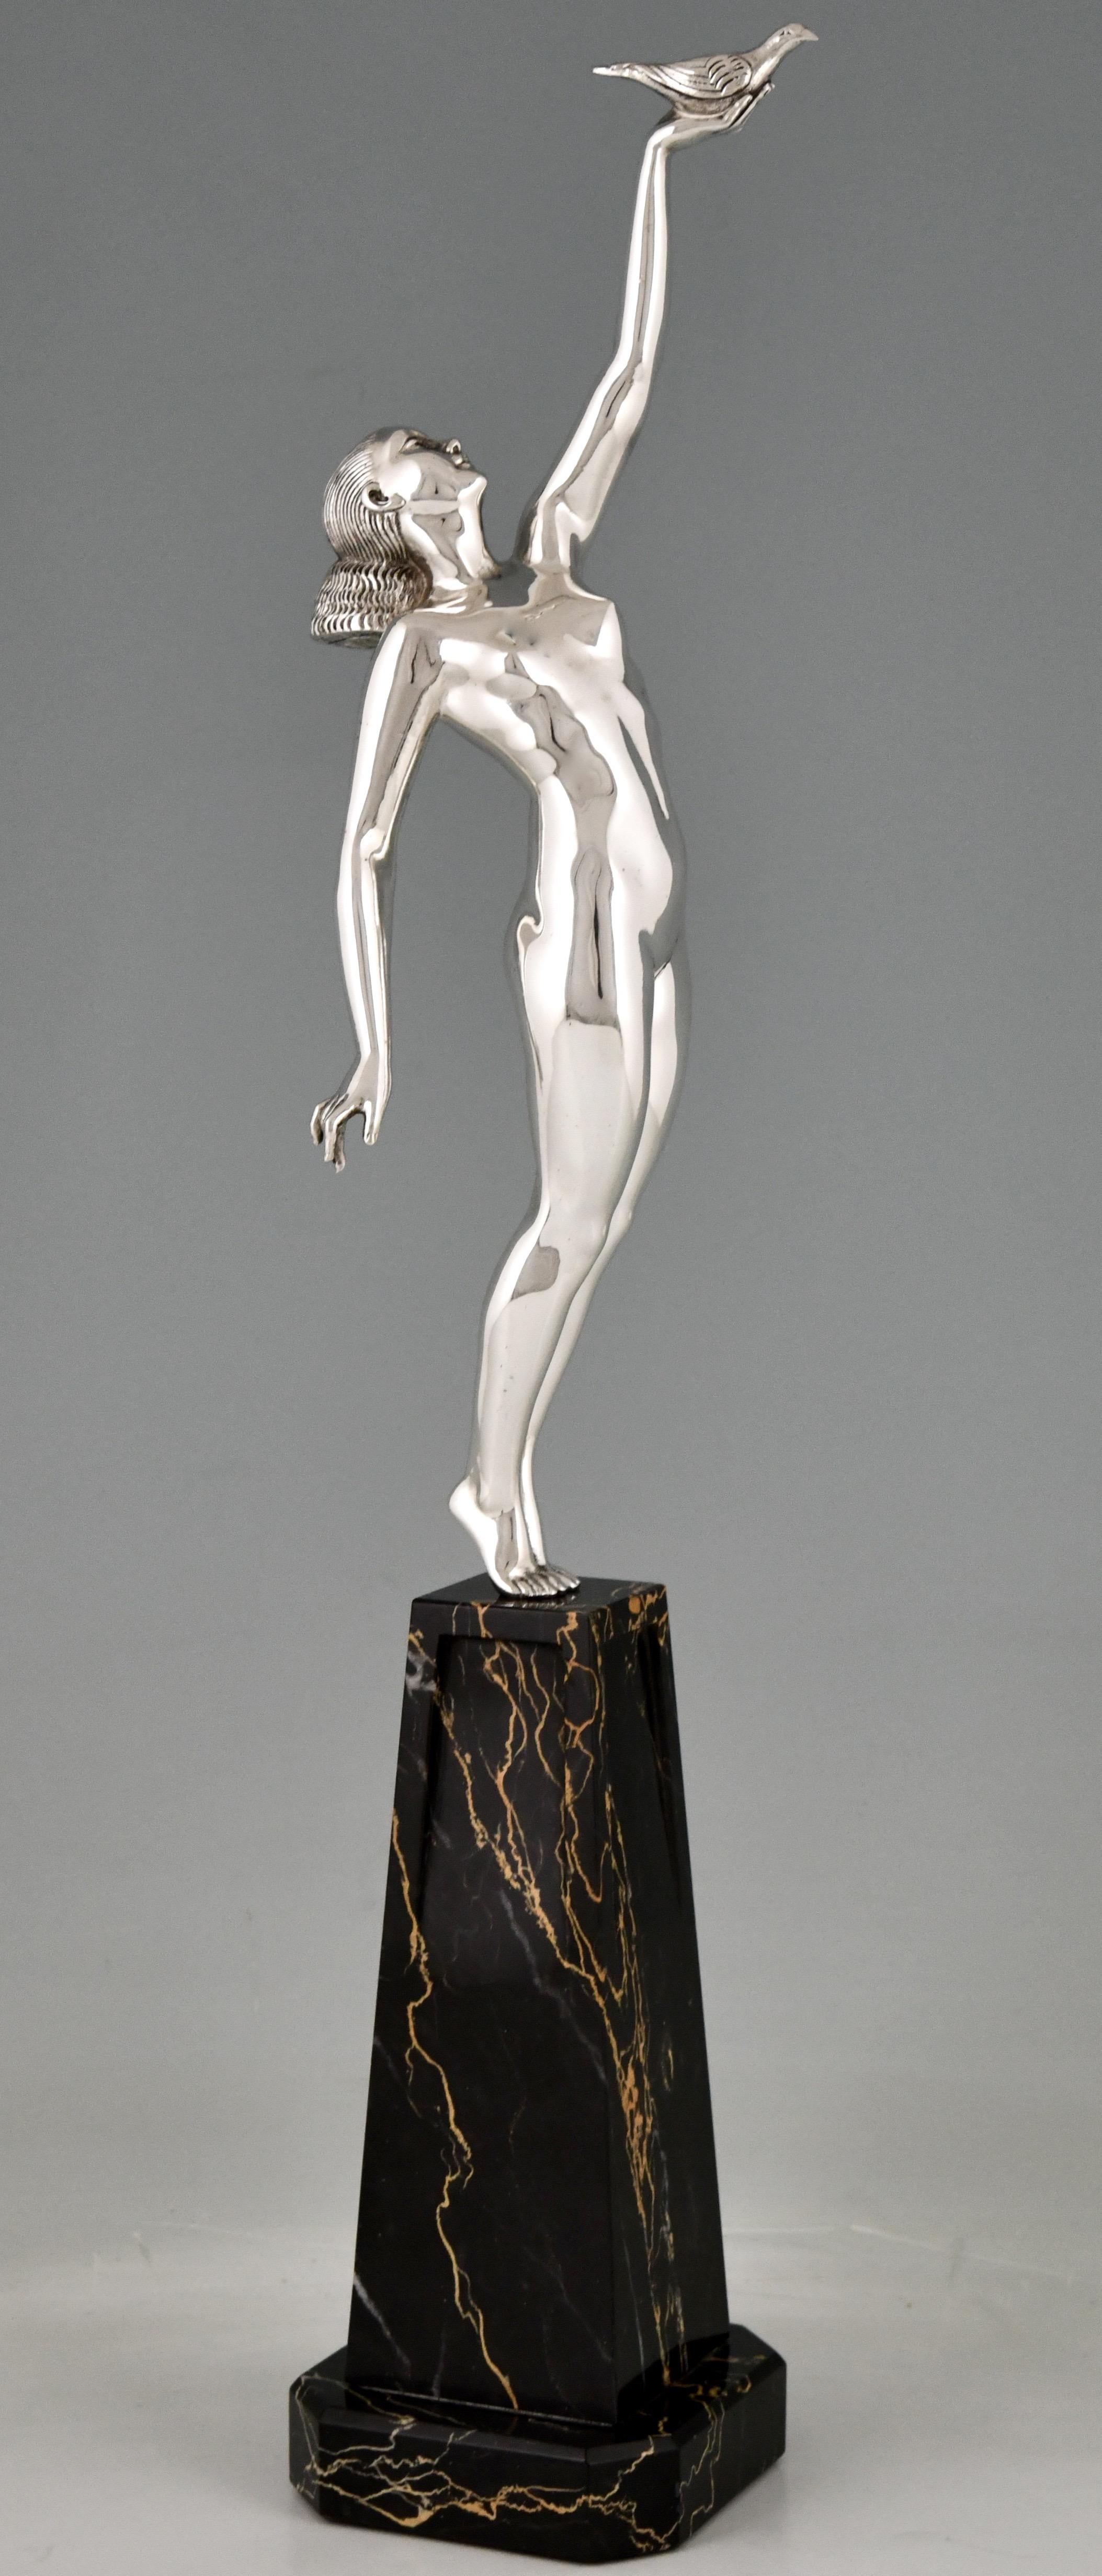 Art Deco bronze sculpture of a nude with dove, message of love signed by Pierre Le Faguays. 
Silvered bronze statue on a fine Portor marble base. 
France 1925. Pierre Le Faguays, 1892 – 1962. 

About the artist:
Pierre le Faguays was born in